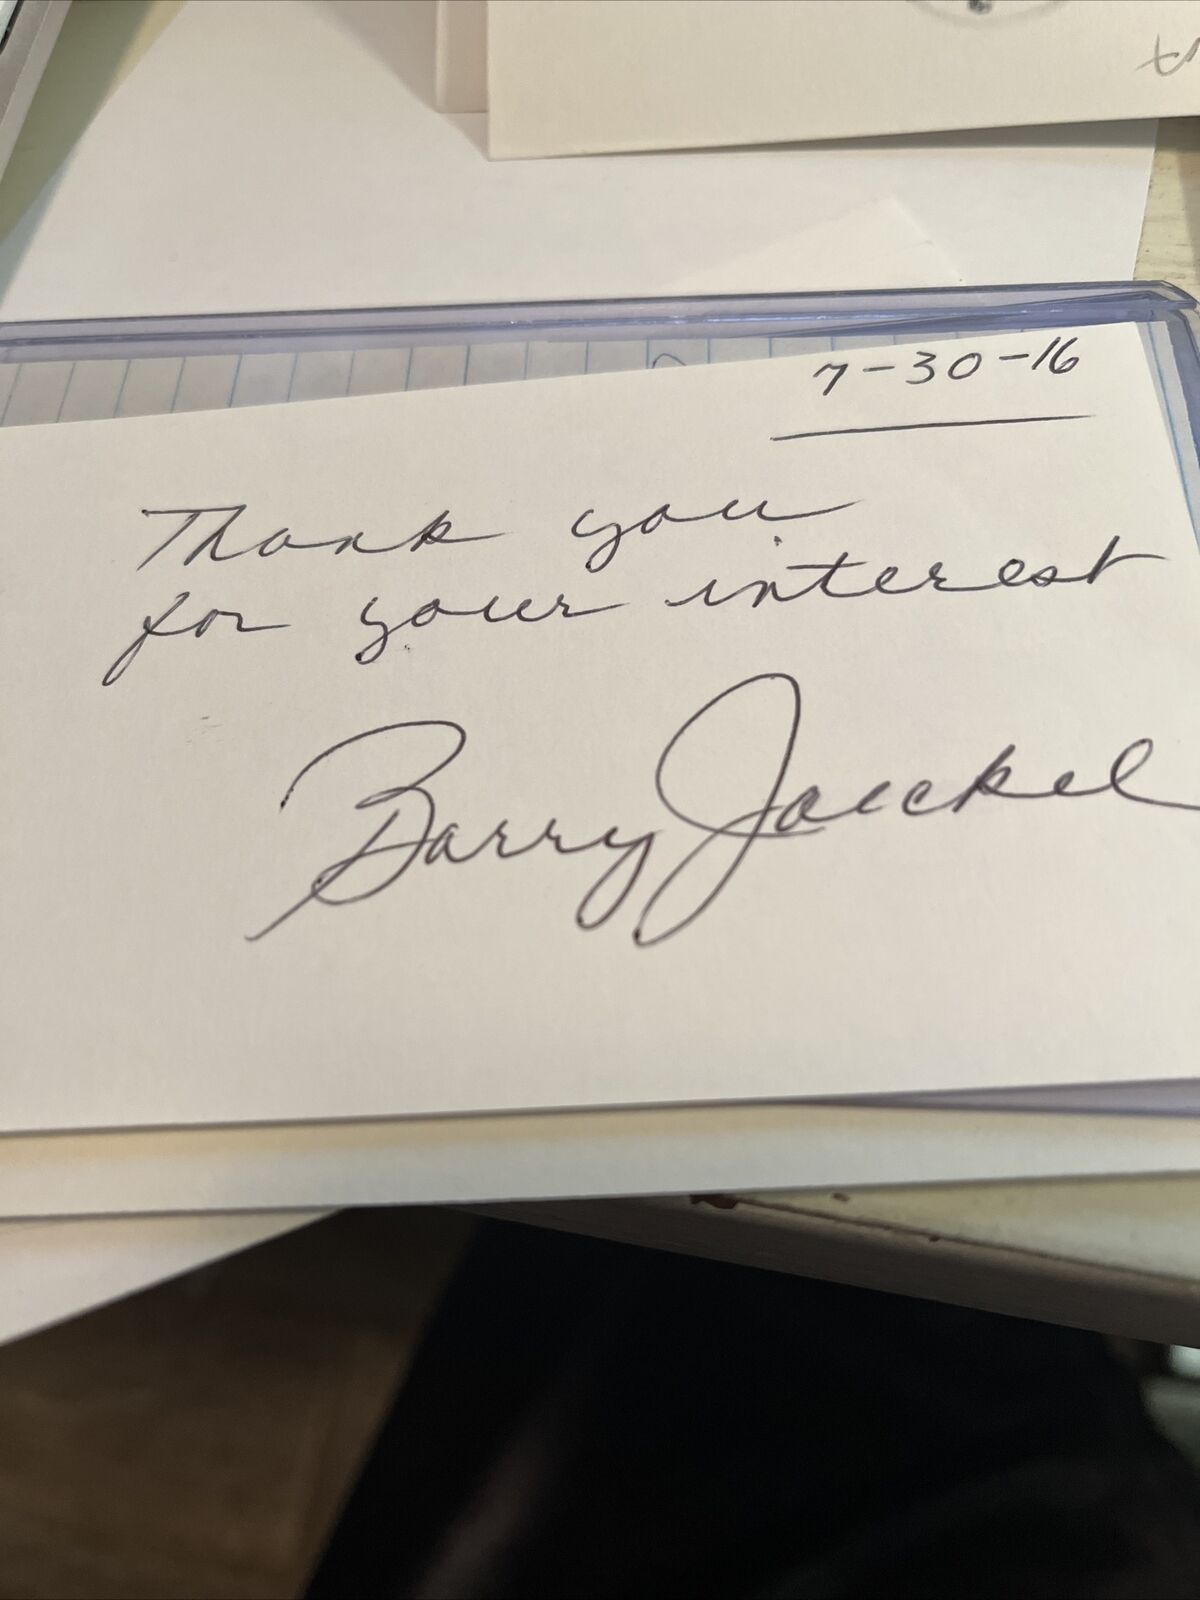 Barry Jaeckel Signed 3x5 Index Card